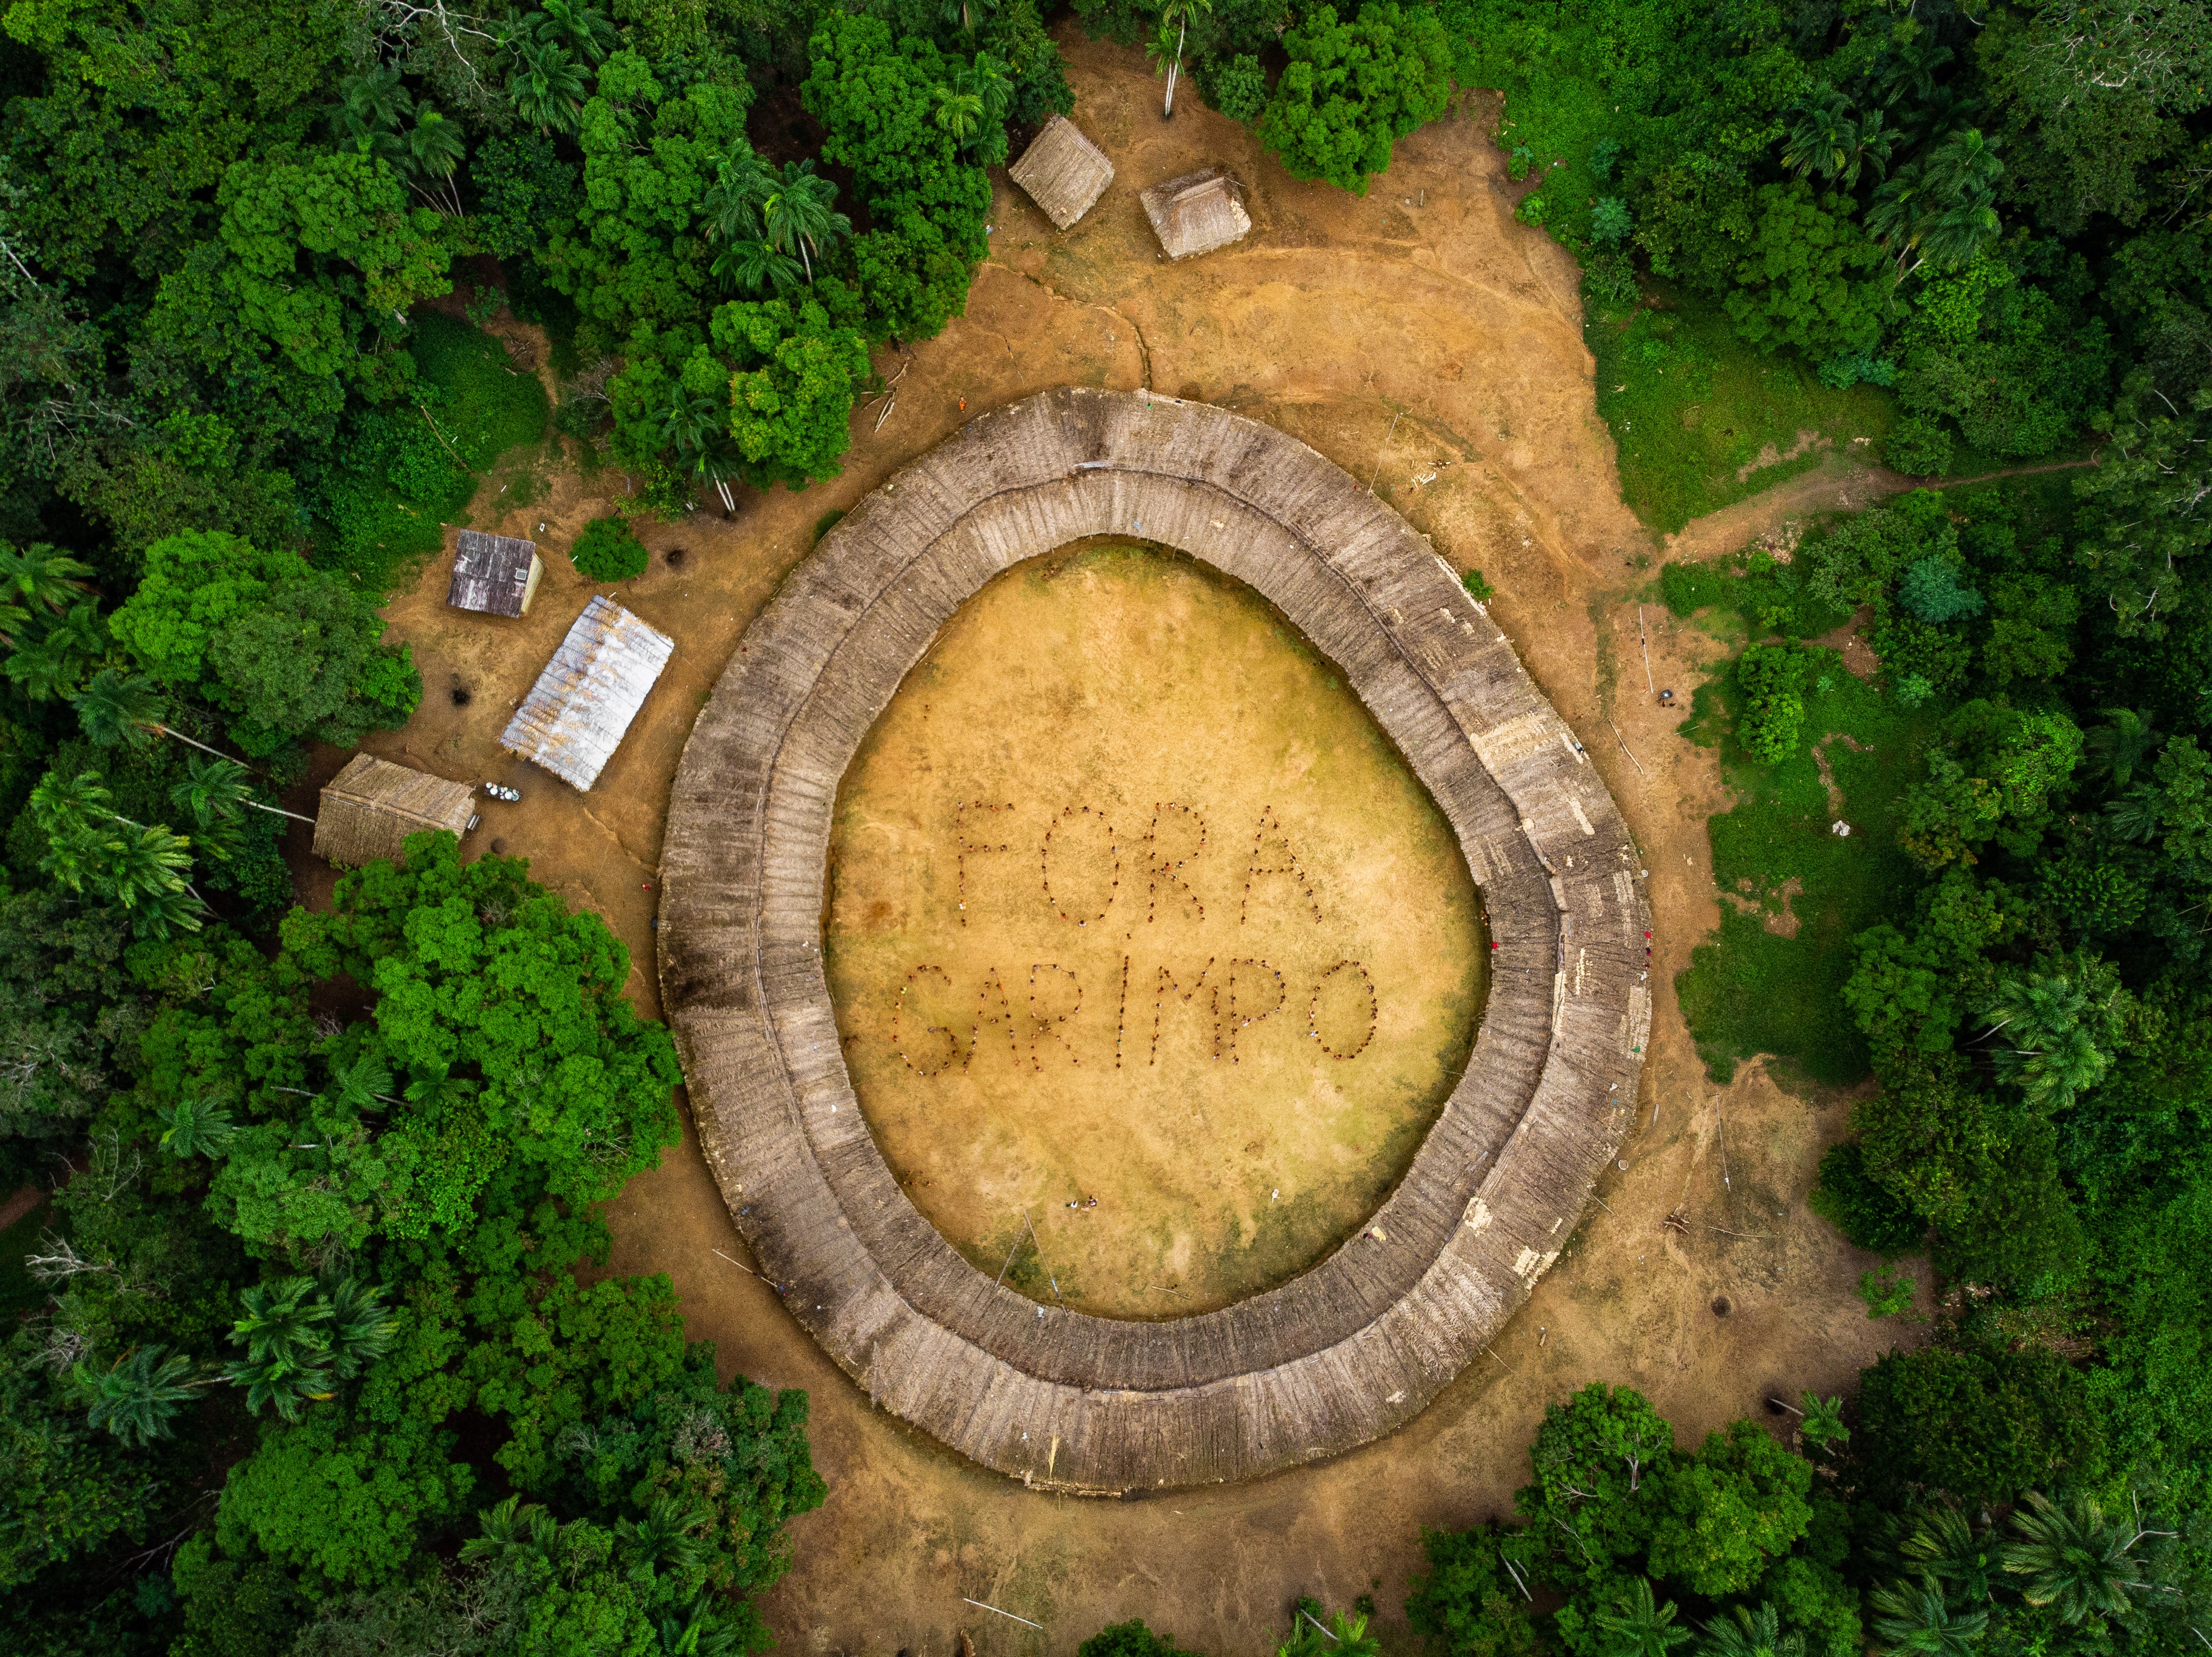 The 120 Yanomami and Yek’wana leaders at the meeting gather in the centre of the village, and holding hands, spell out the message they want to send to Brazil and the world: no more mining!